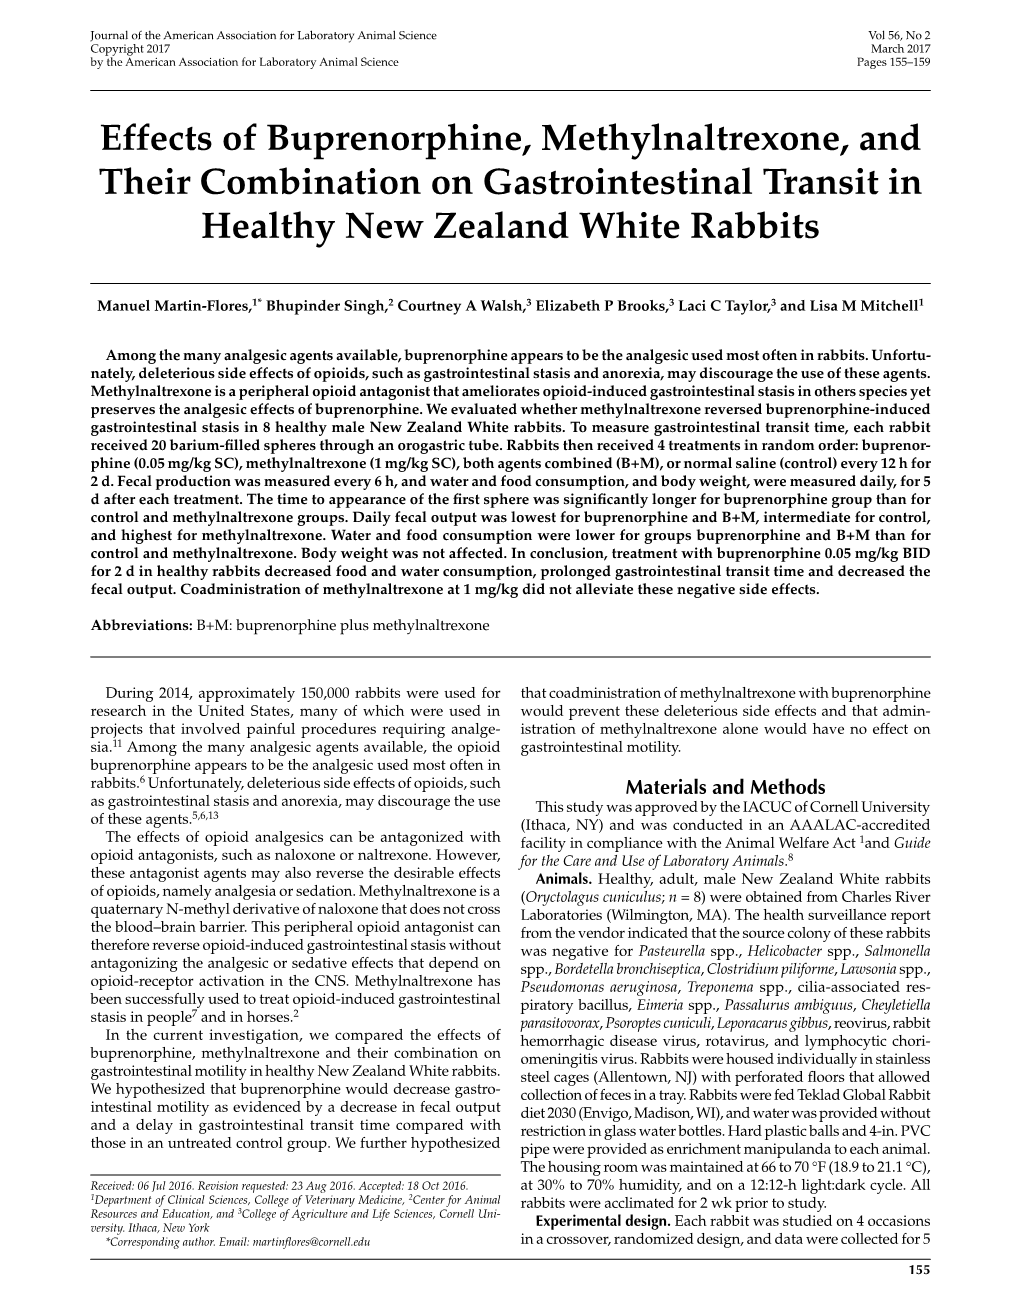 Effects of Buprenorphine, Methylnaltrexone, and Their Combination on Gastrointestinal Transit in Healthy New Zealand White Rabbits